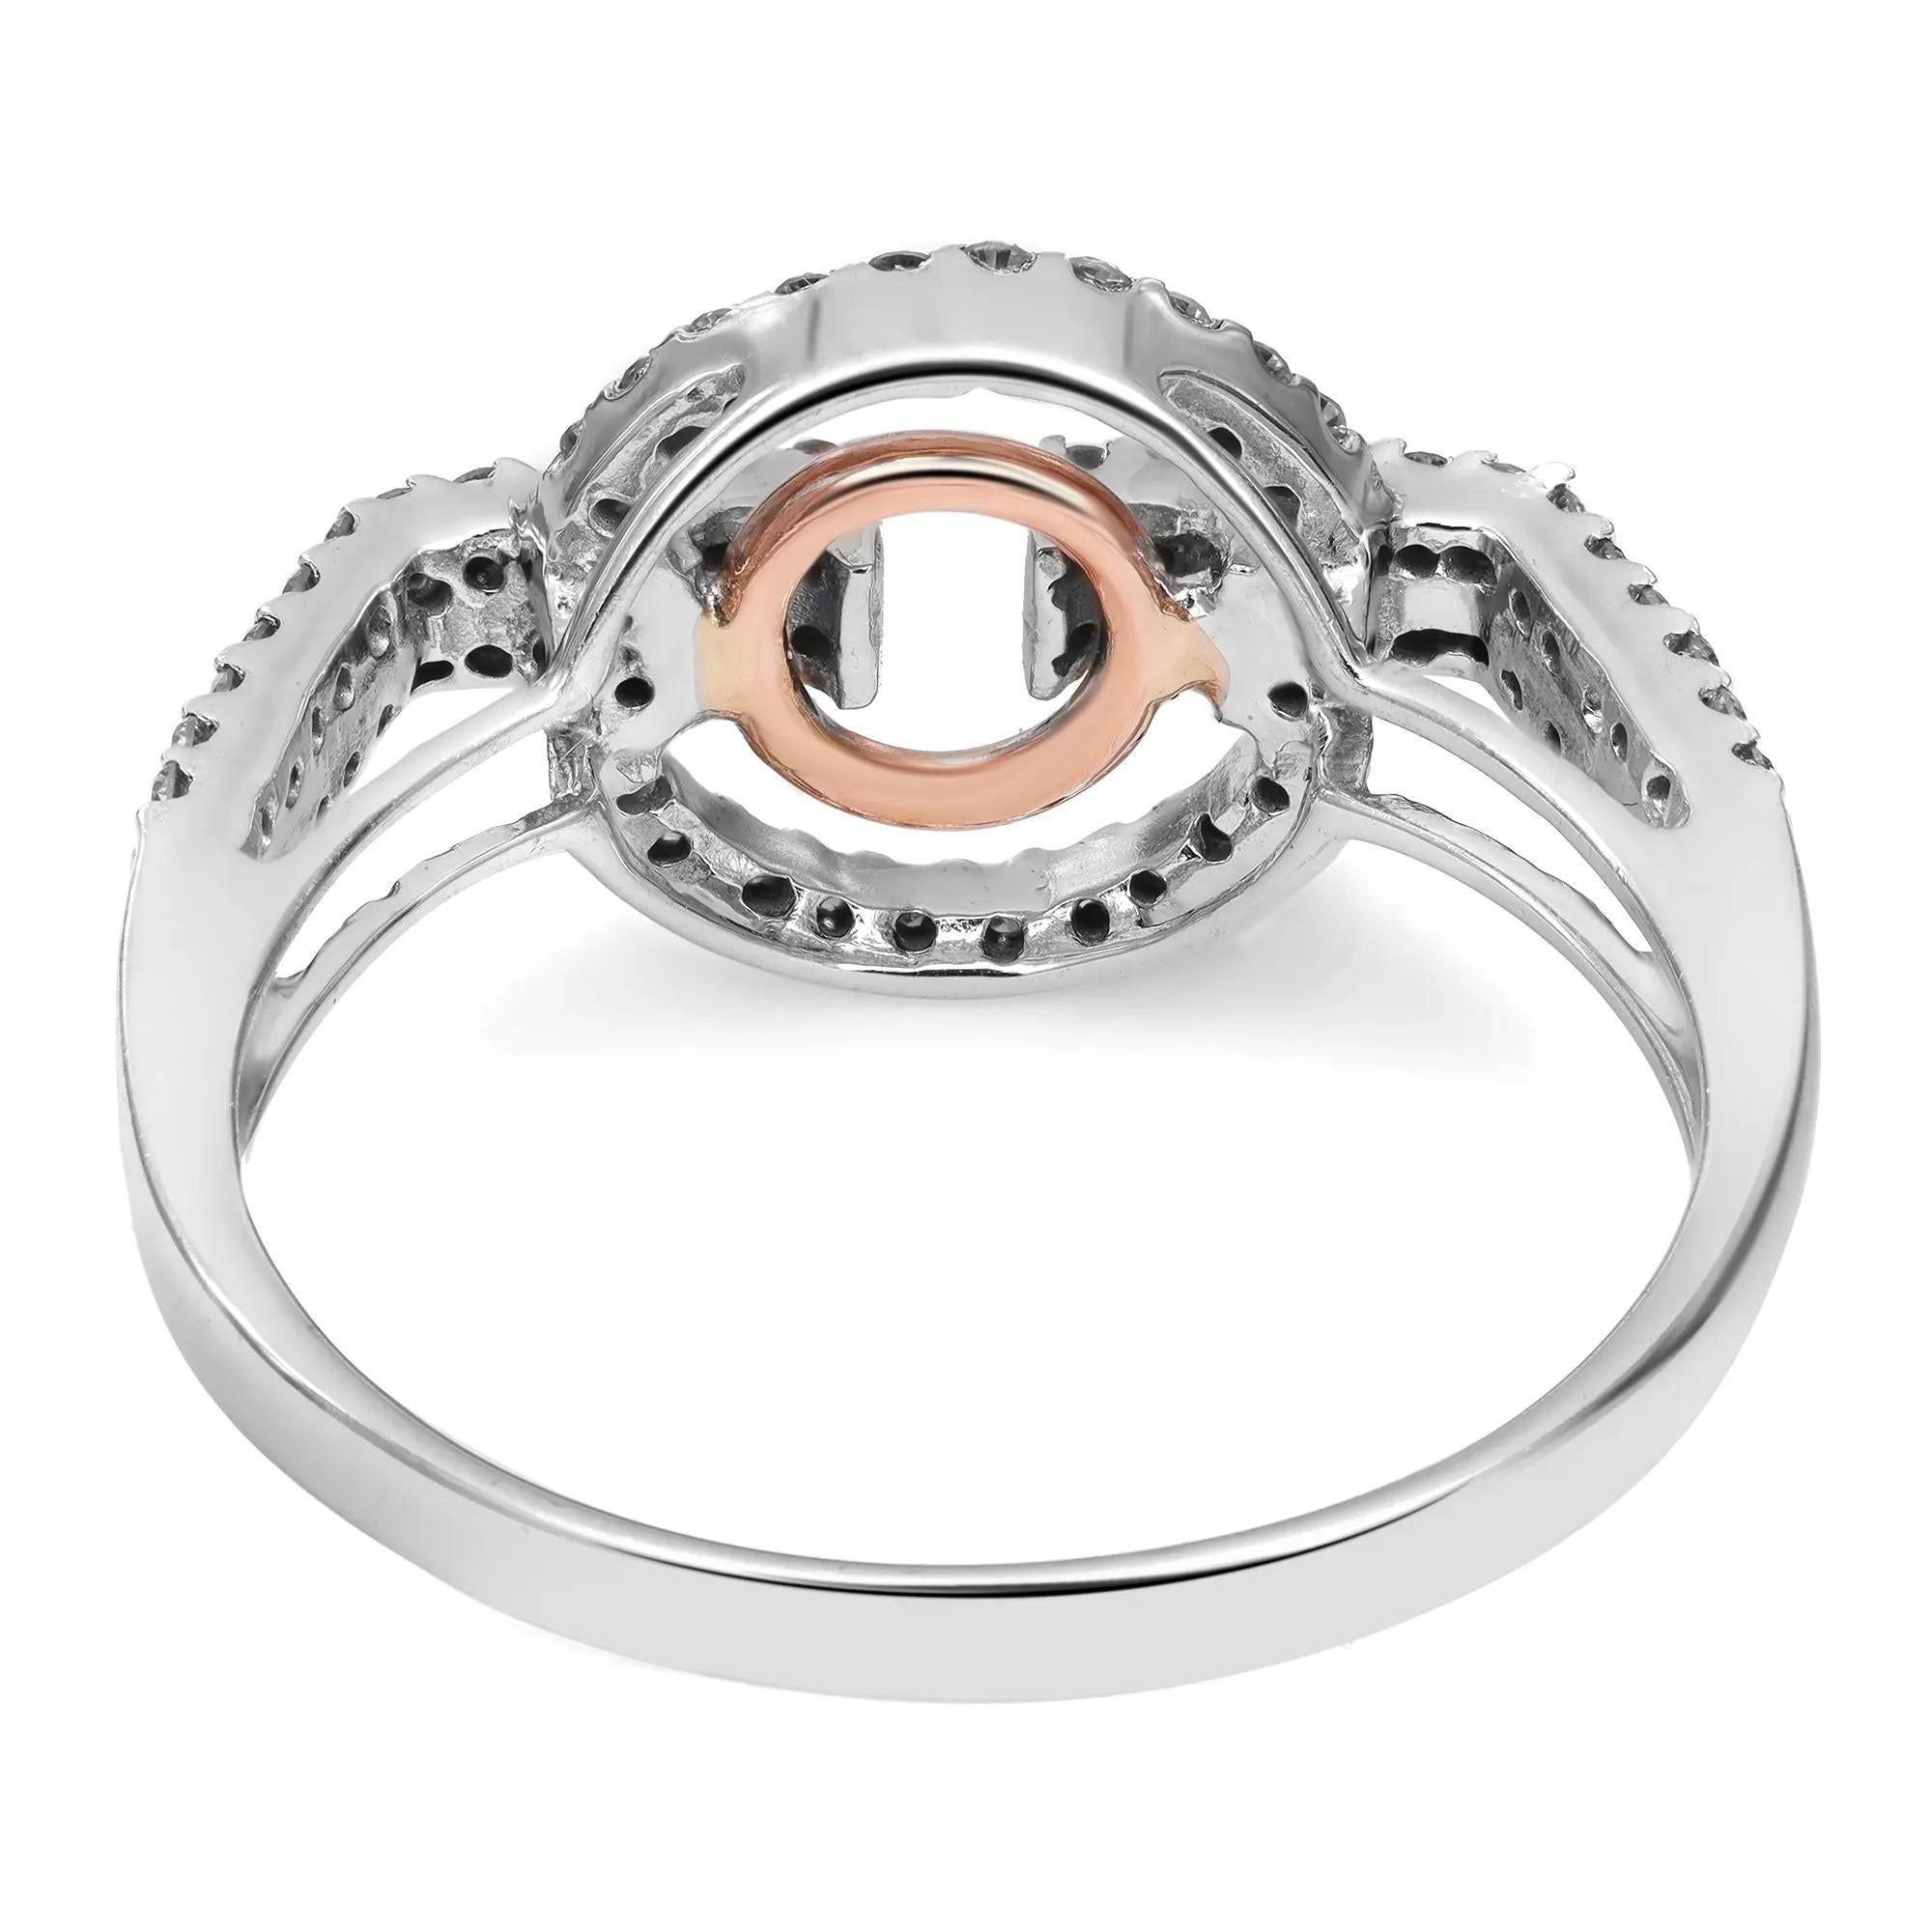 0.43cttw Prong Set Round Cut Diamond Ladies Ring 14k White & Rose Gold In New Condition For Sale In New York, NY